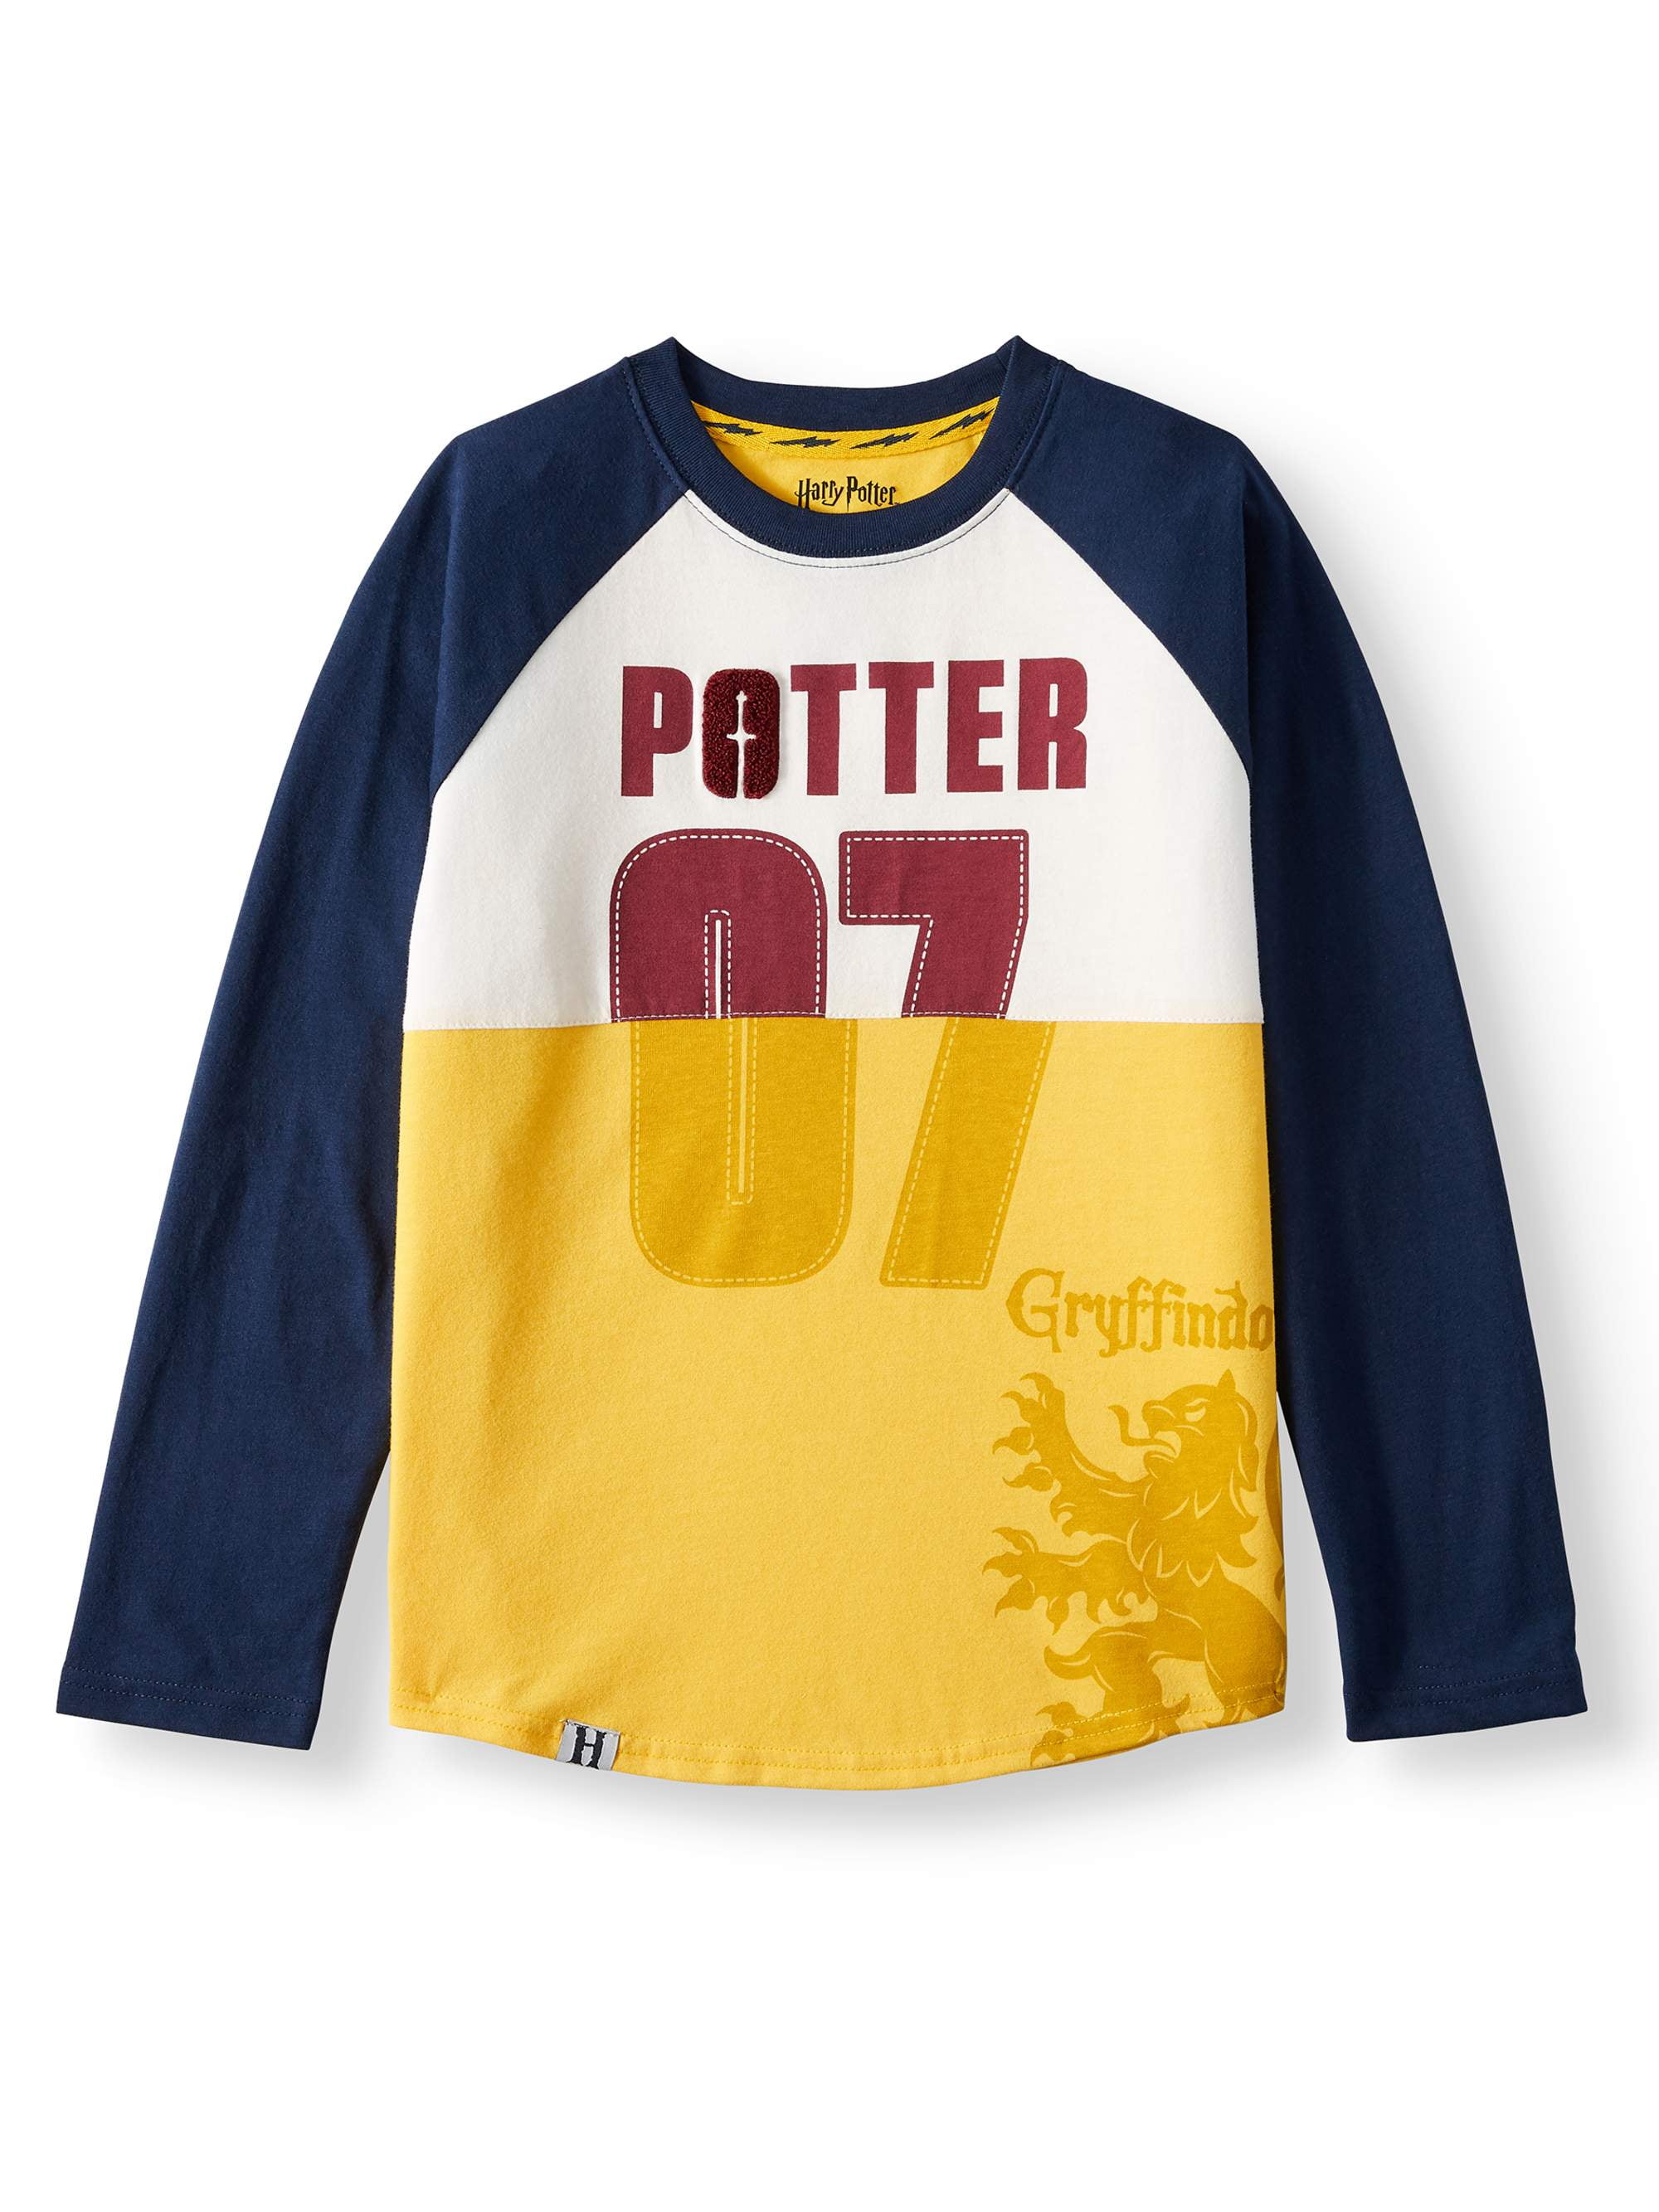 Boys Harry Potter Hogwarts Stripe Long Sleeve T-Shirt Cotton Top Sizes from 9 to 14 Years